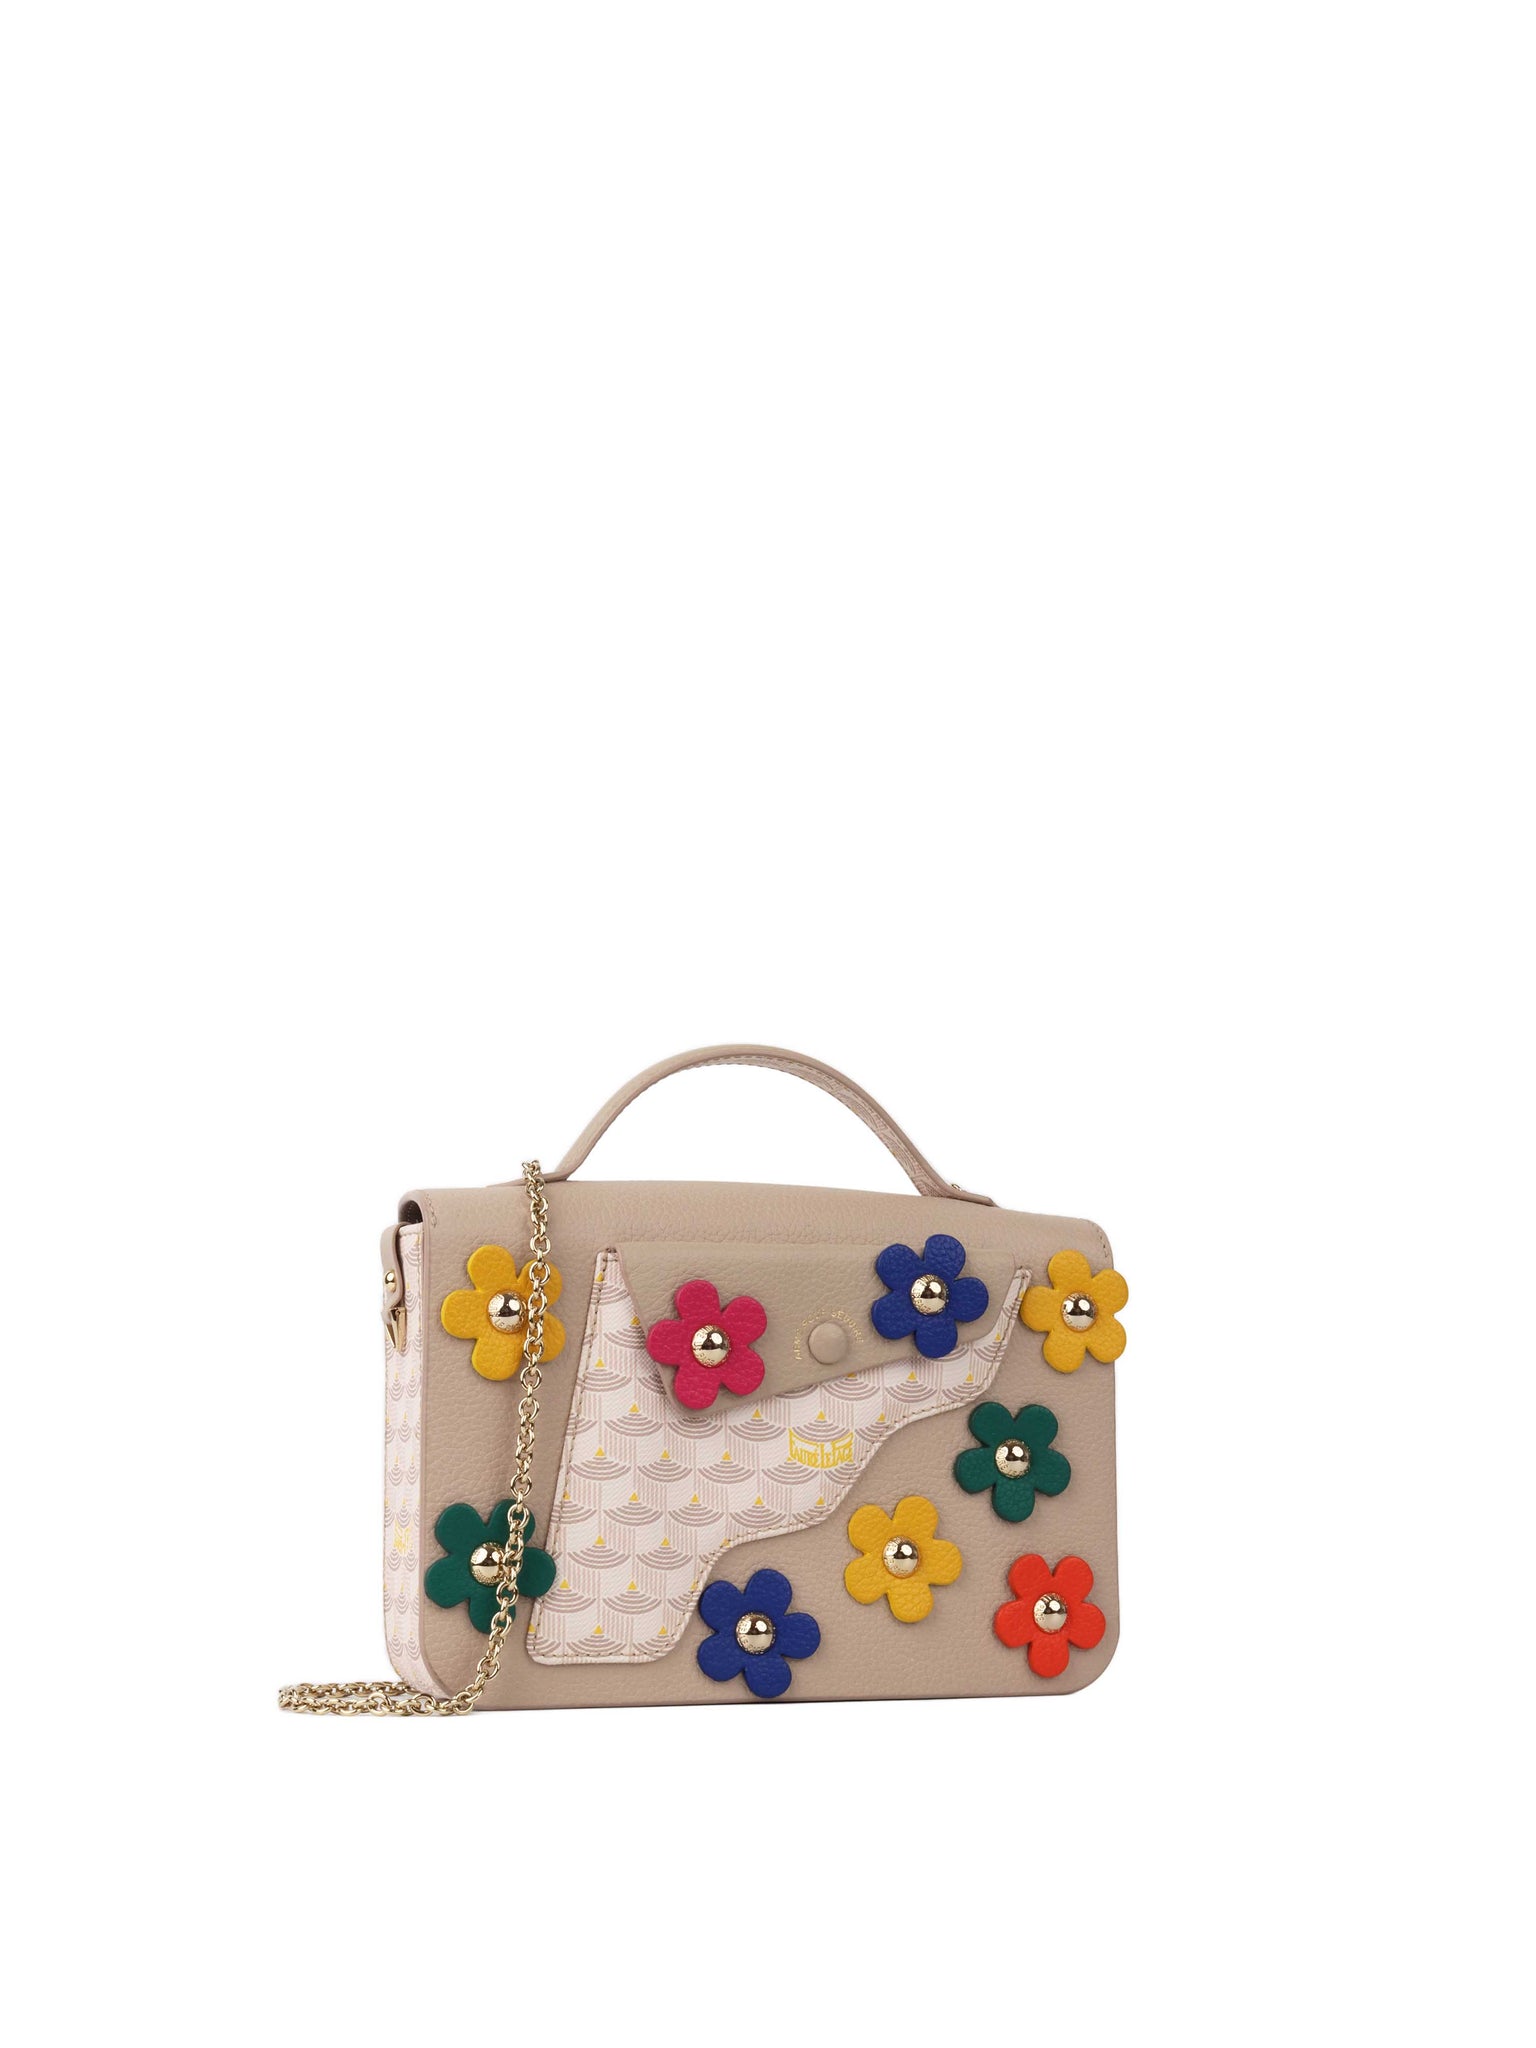 Faure Le Page Flower Top Handle Crossbody Tote.